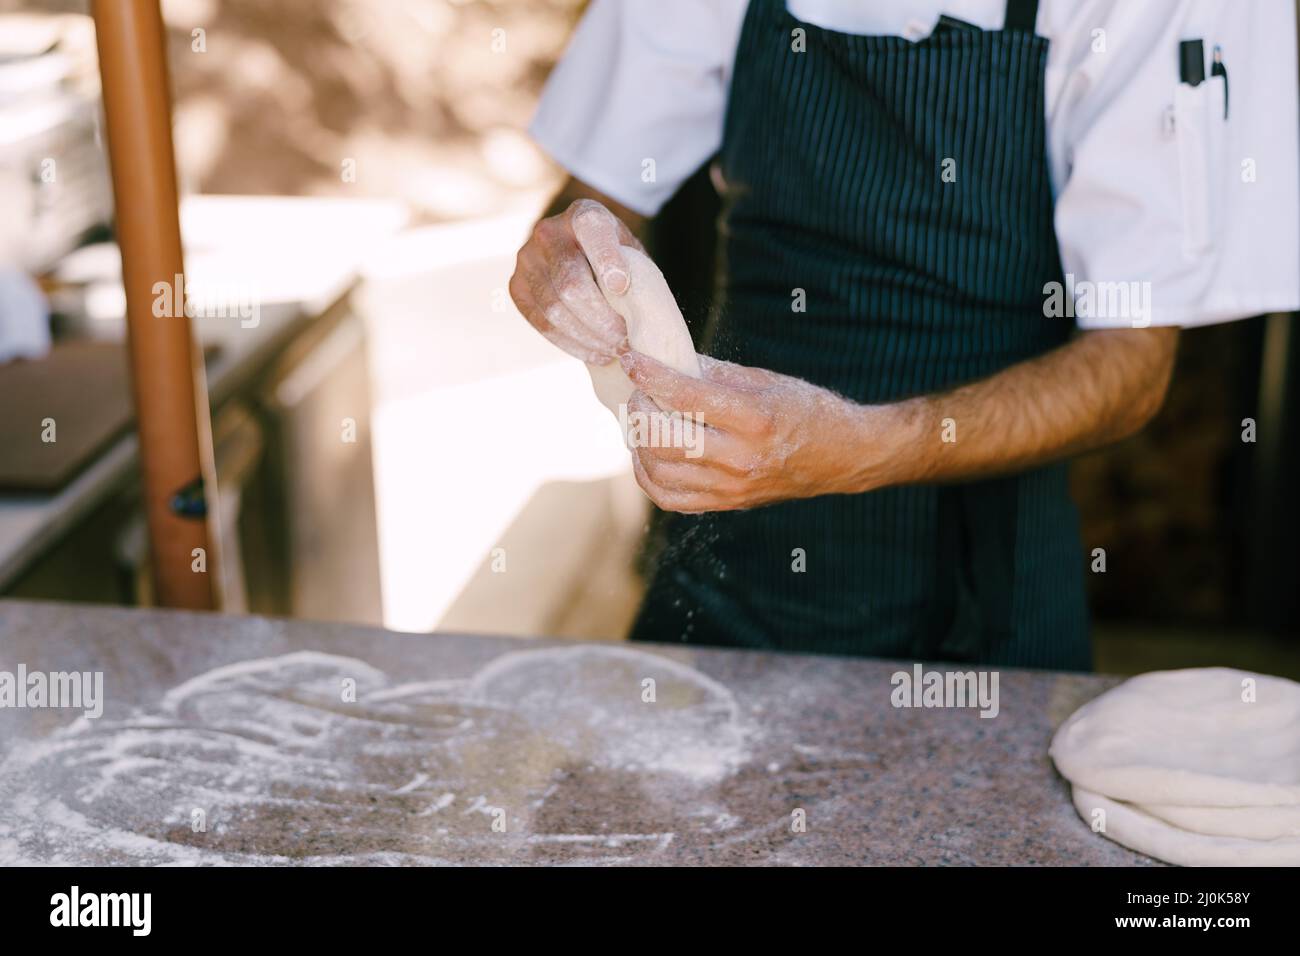 Chef's hands close-up. Prepares the dough for pizza, rolls out in round shapes with his hands. Stock Photo